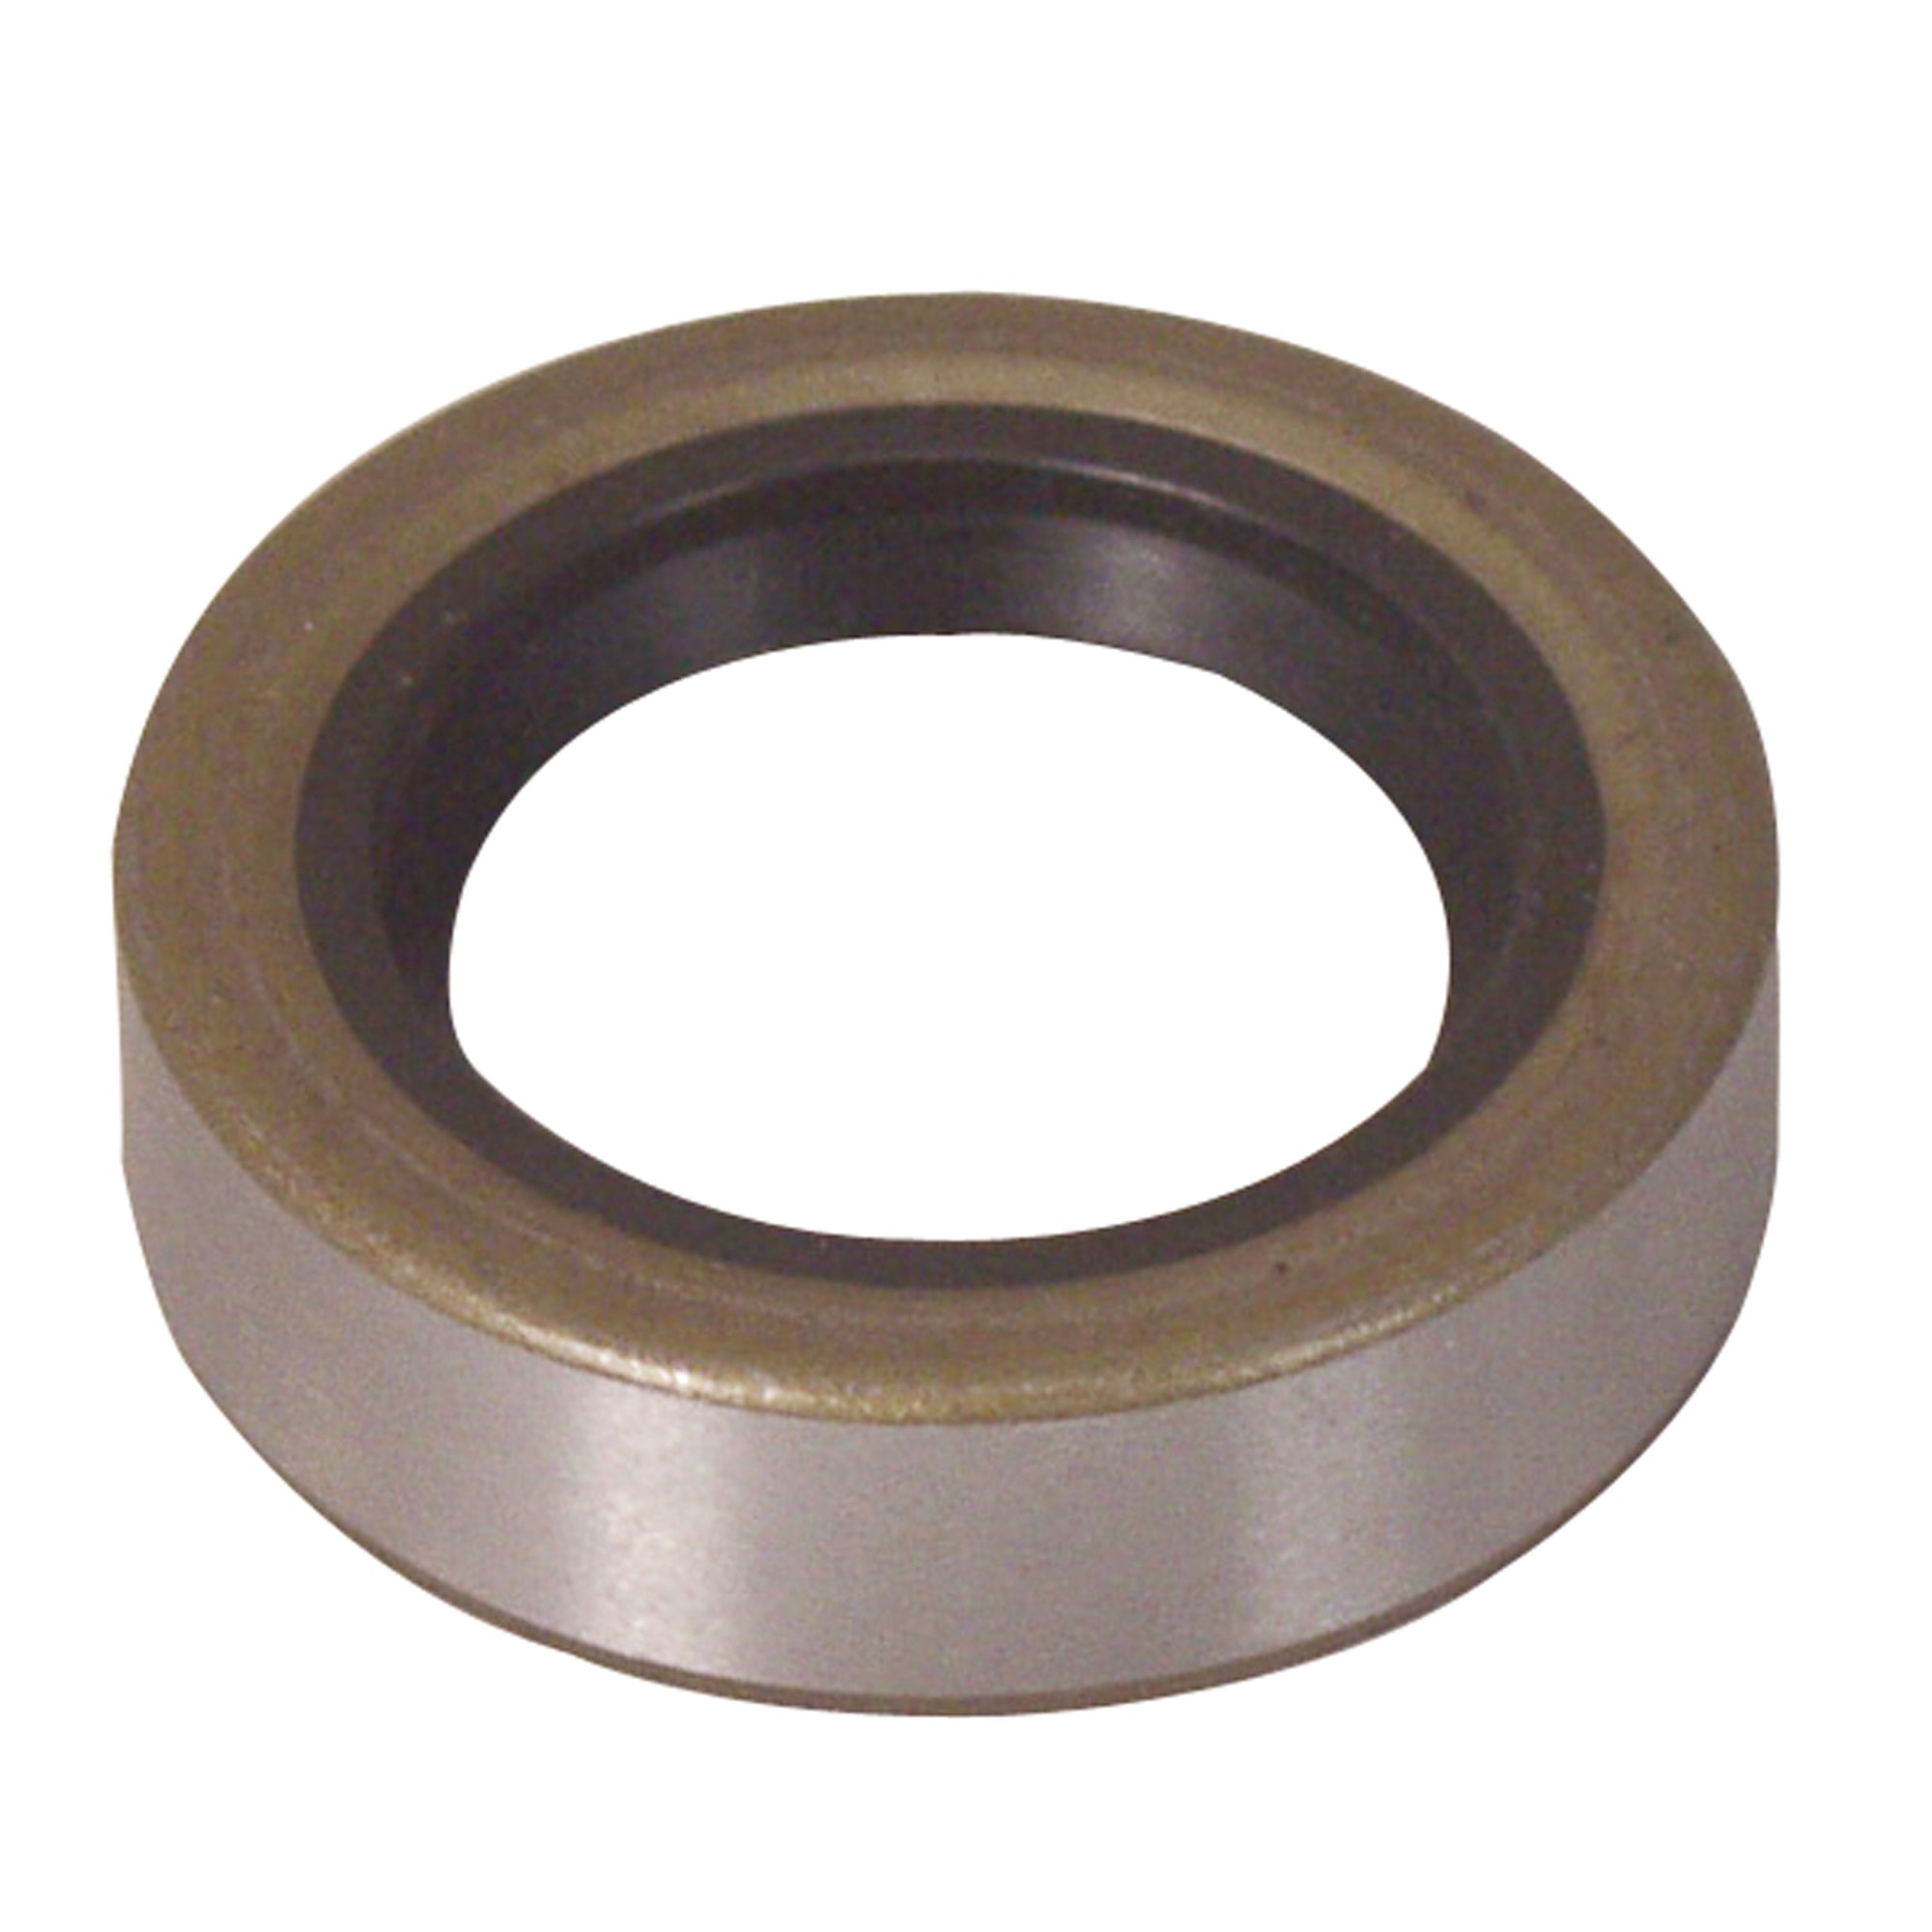 Dutton-Lainson 21768 Grease Seal - 3/4 in.